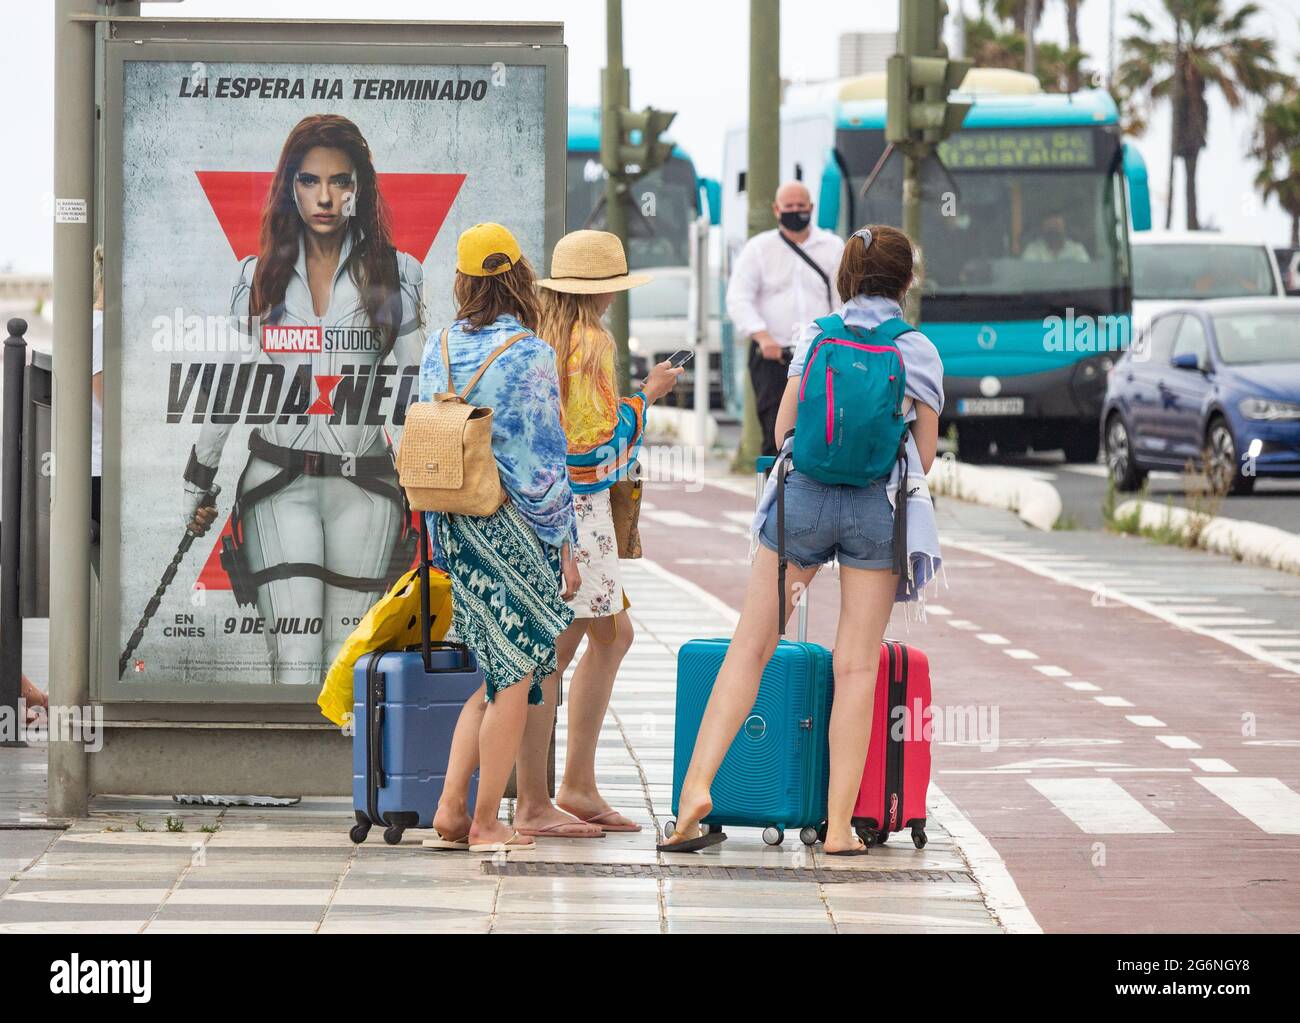 Las Palmas, Gran Canaria, Canary Islands, Spain. 7th July, 2021. Tourists  waiting for airport bus near the city beach in Las Palmas on Gran Canaria.  The Canary Islands, currently on the Amber